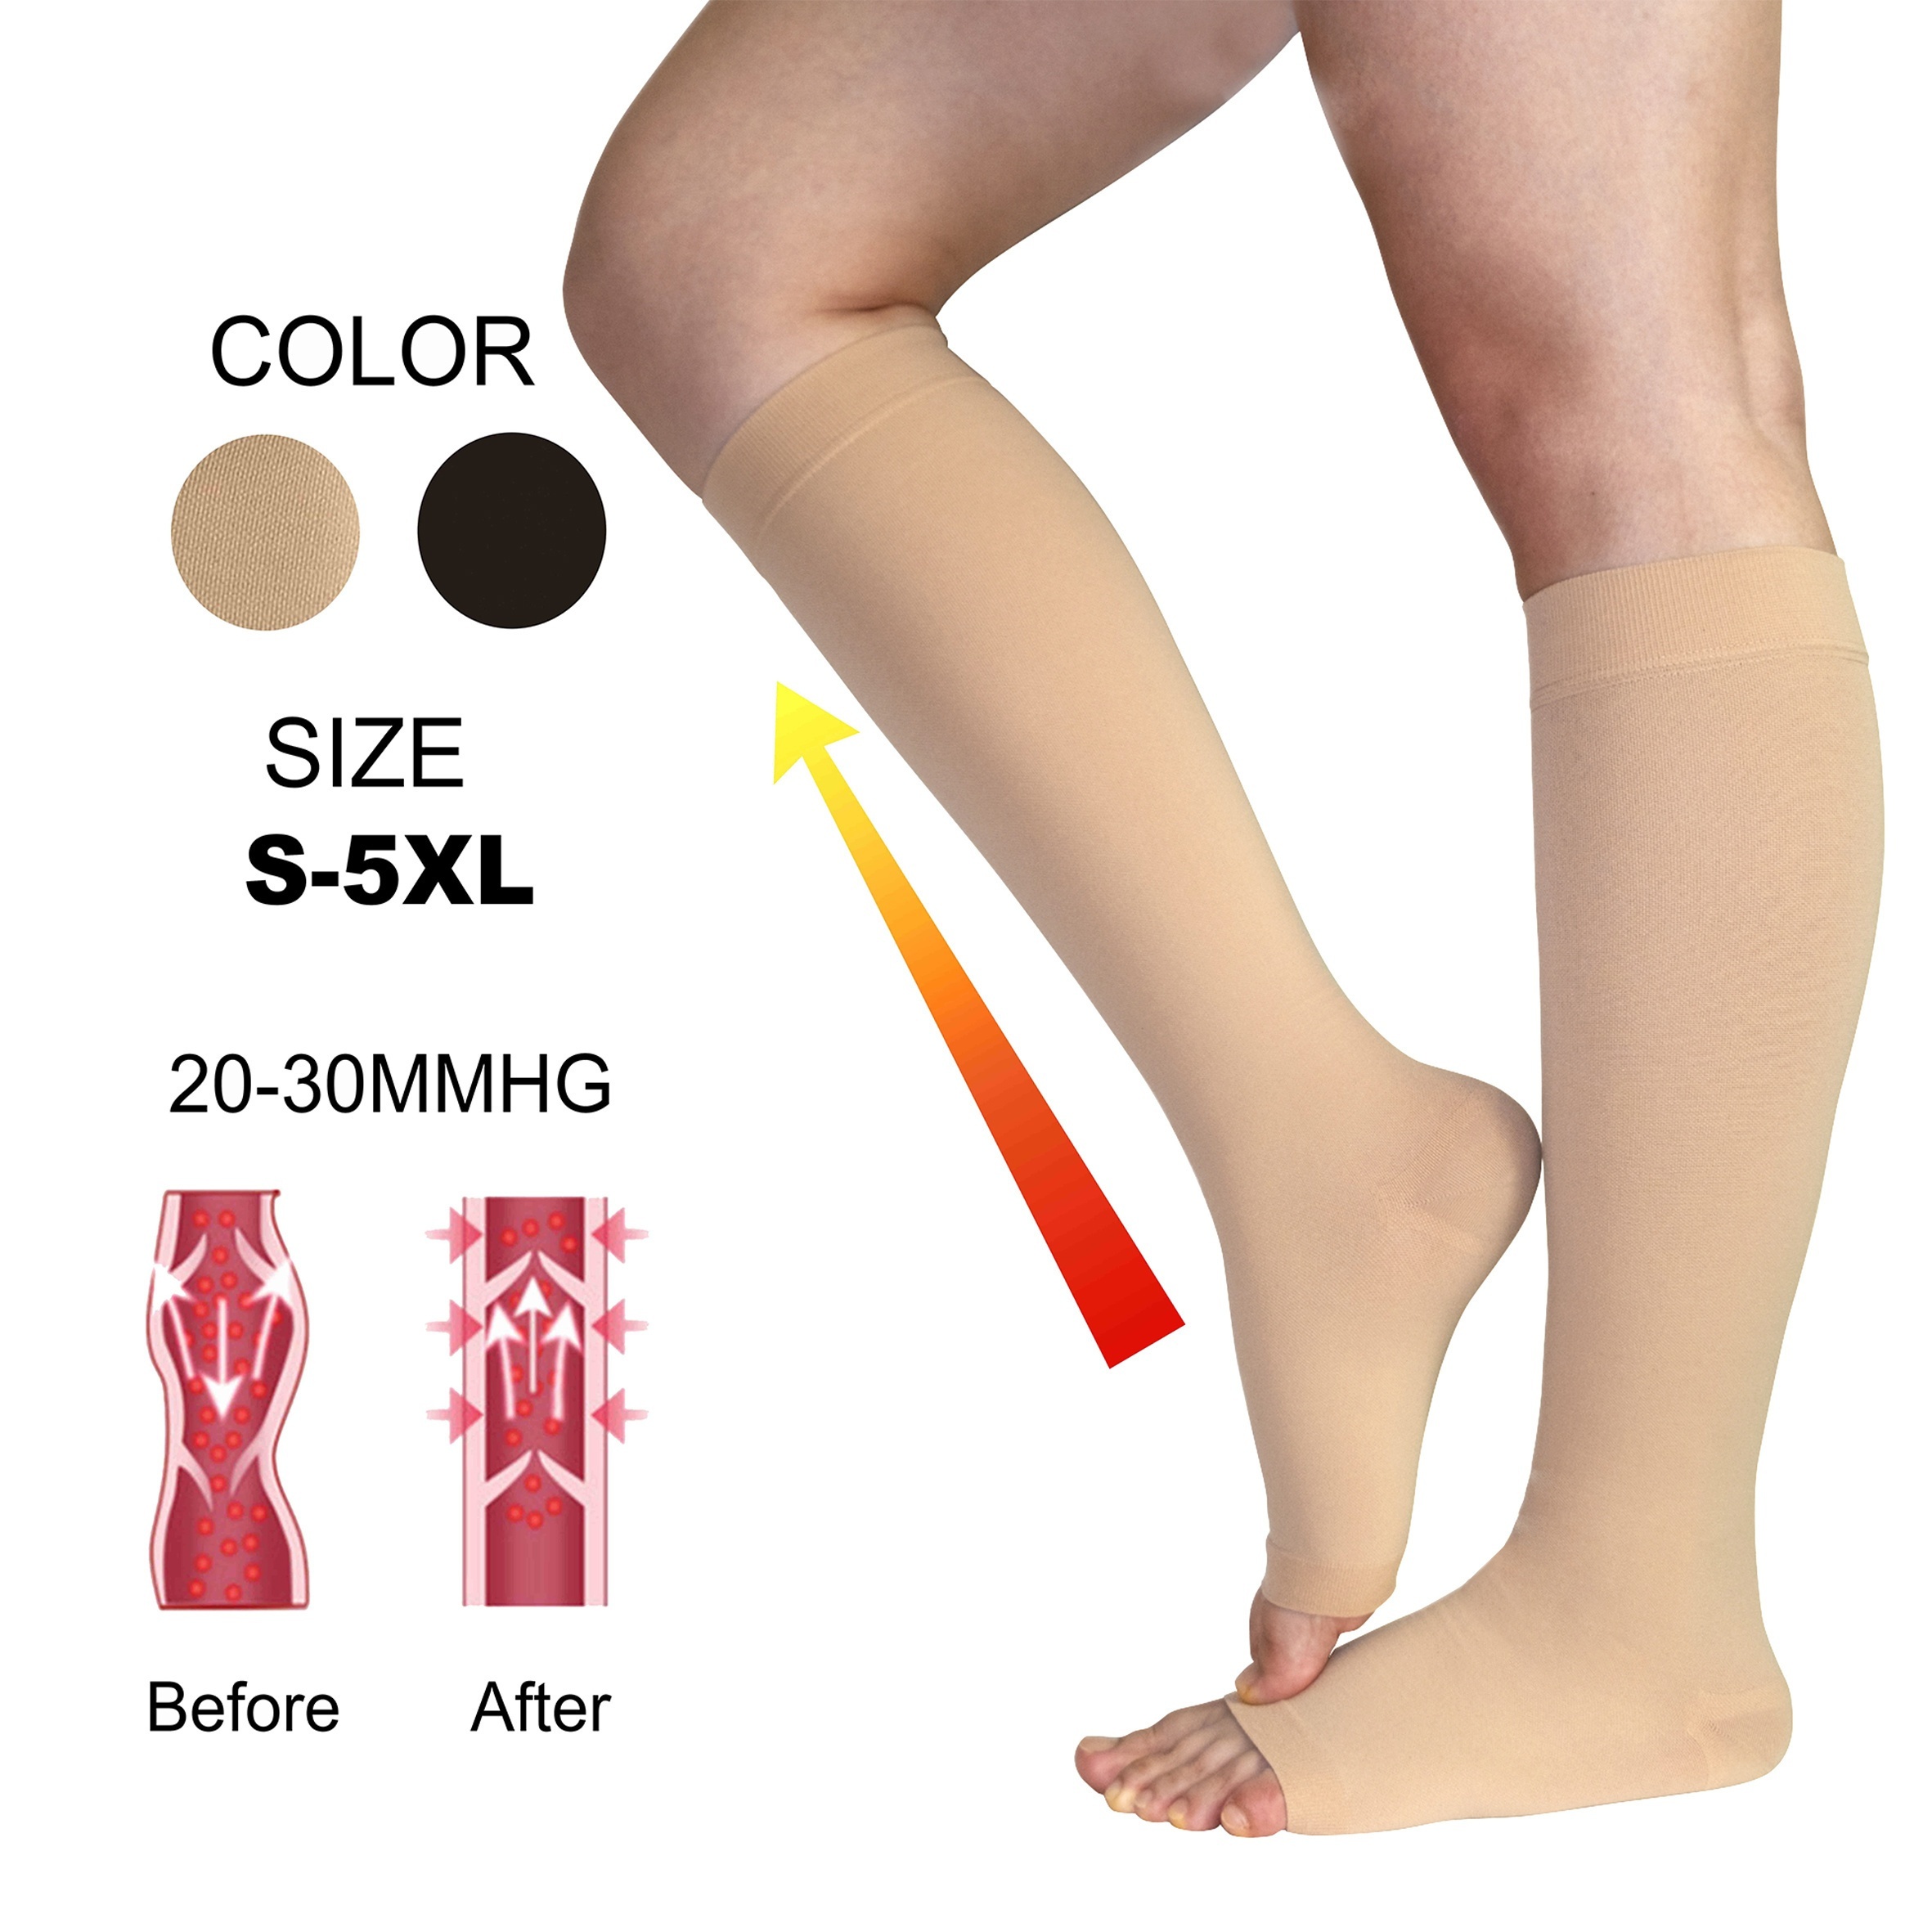 TOFLY® Medical Thigh High Compression Stockings Footless for Women & Men,  Opaque Support Hose, 20-30mmHg Graduated Compression Socks with Silicone